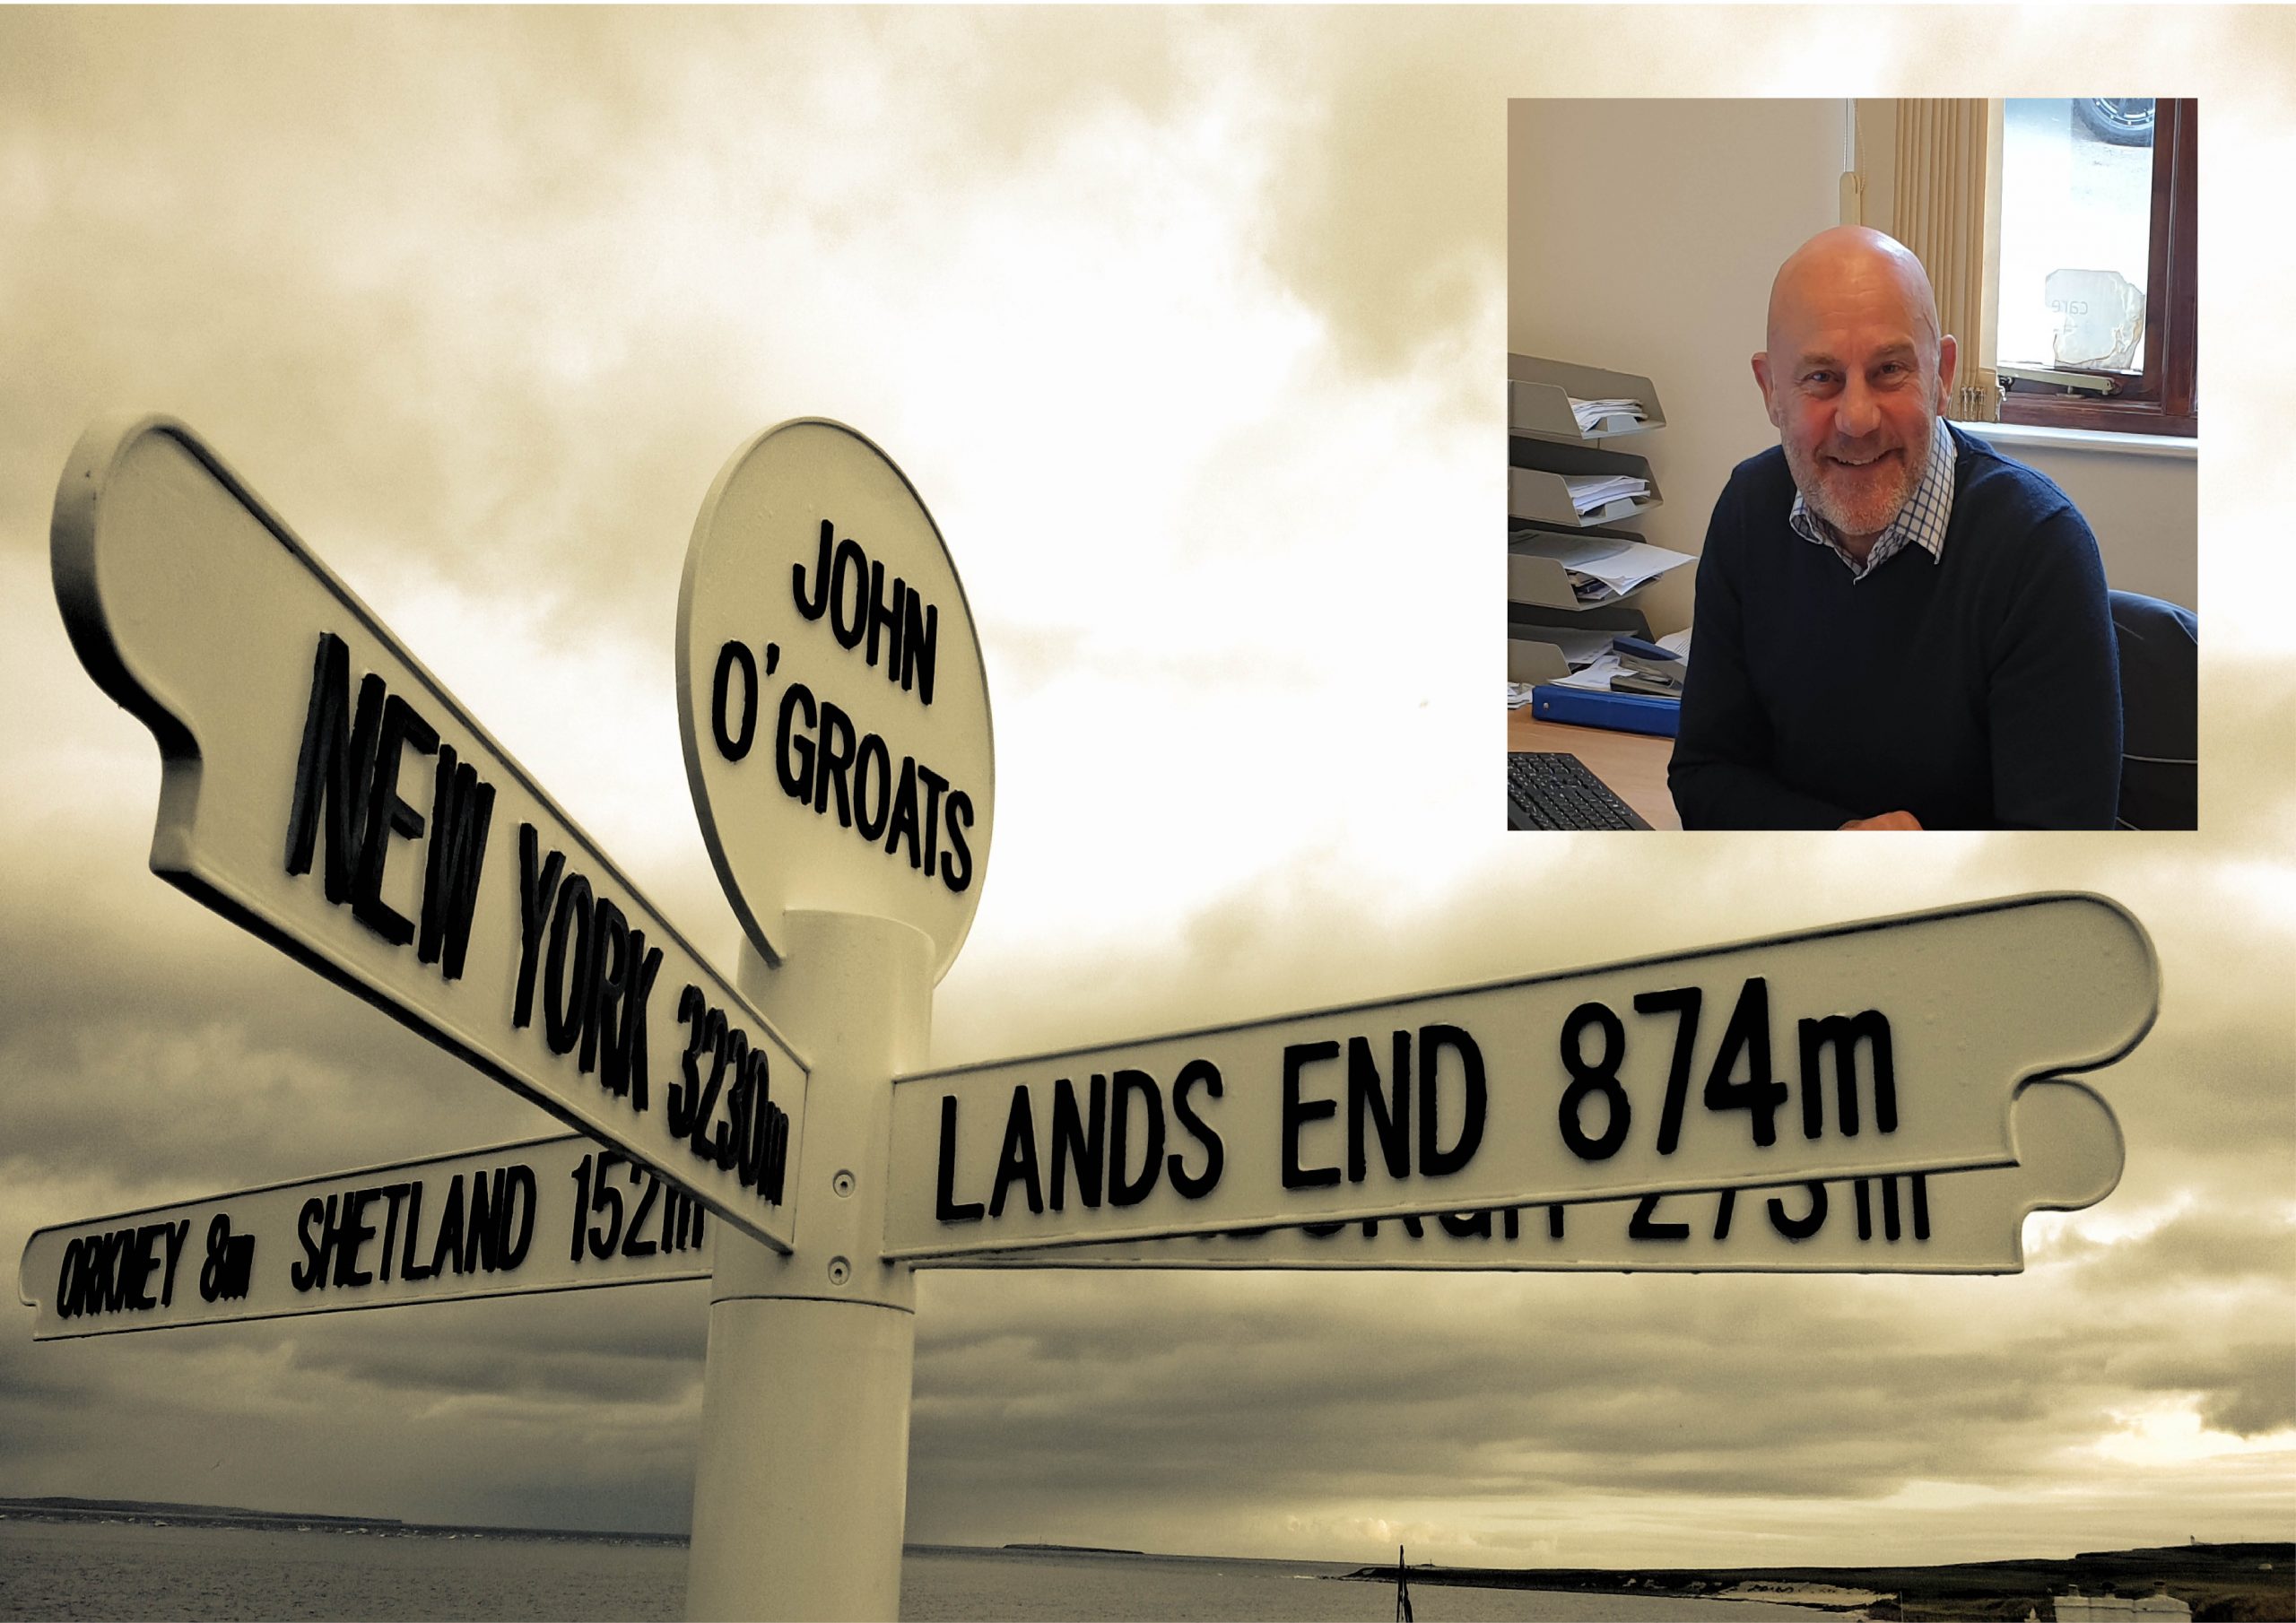 Director Stuart Chamberlain to take on the LEJOG Lands End to John O’Groats Cycling Challenge for Charity